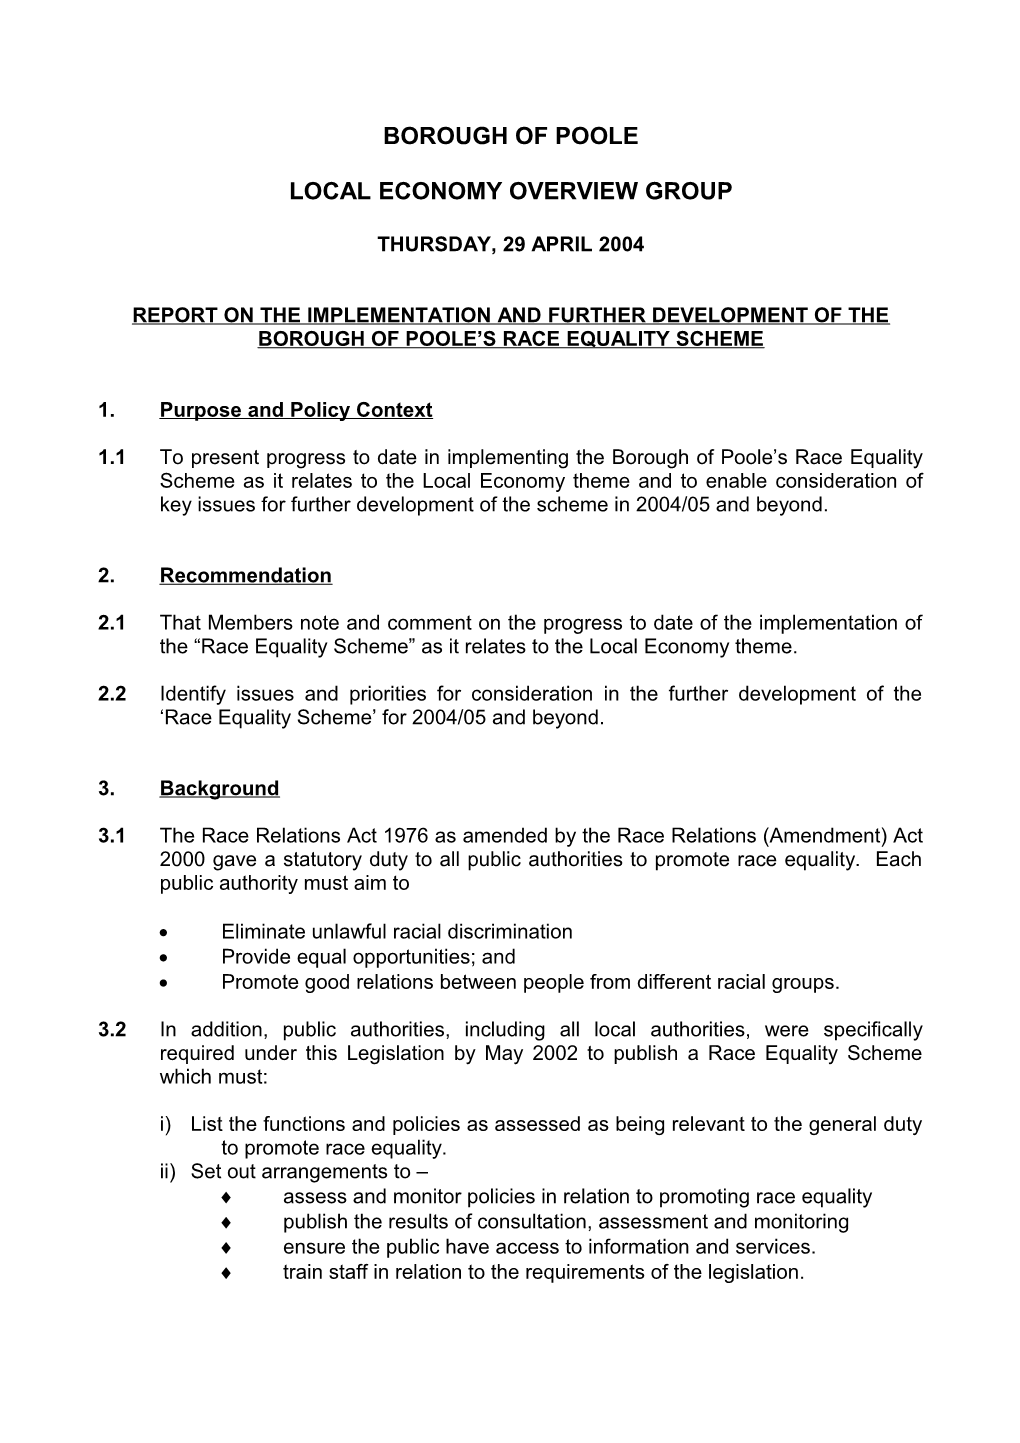 The Implementation and Further Development of the Borough of Poole S Race Equality Scheme